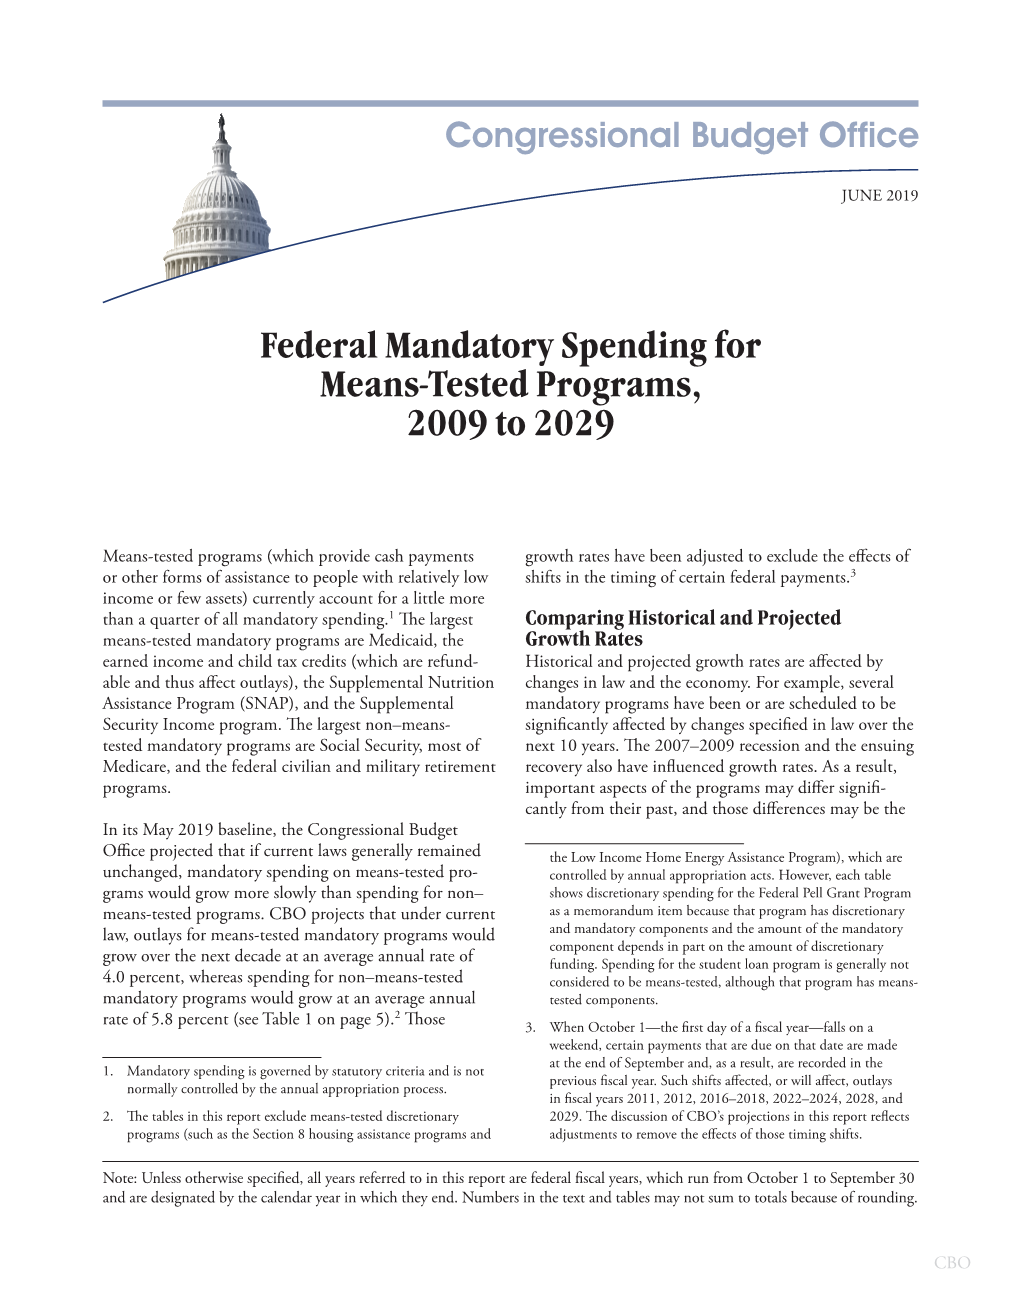 Federal Mandatory Spending for Means-Tested Programs, 2009 to 2029